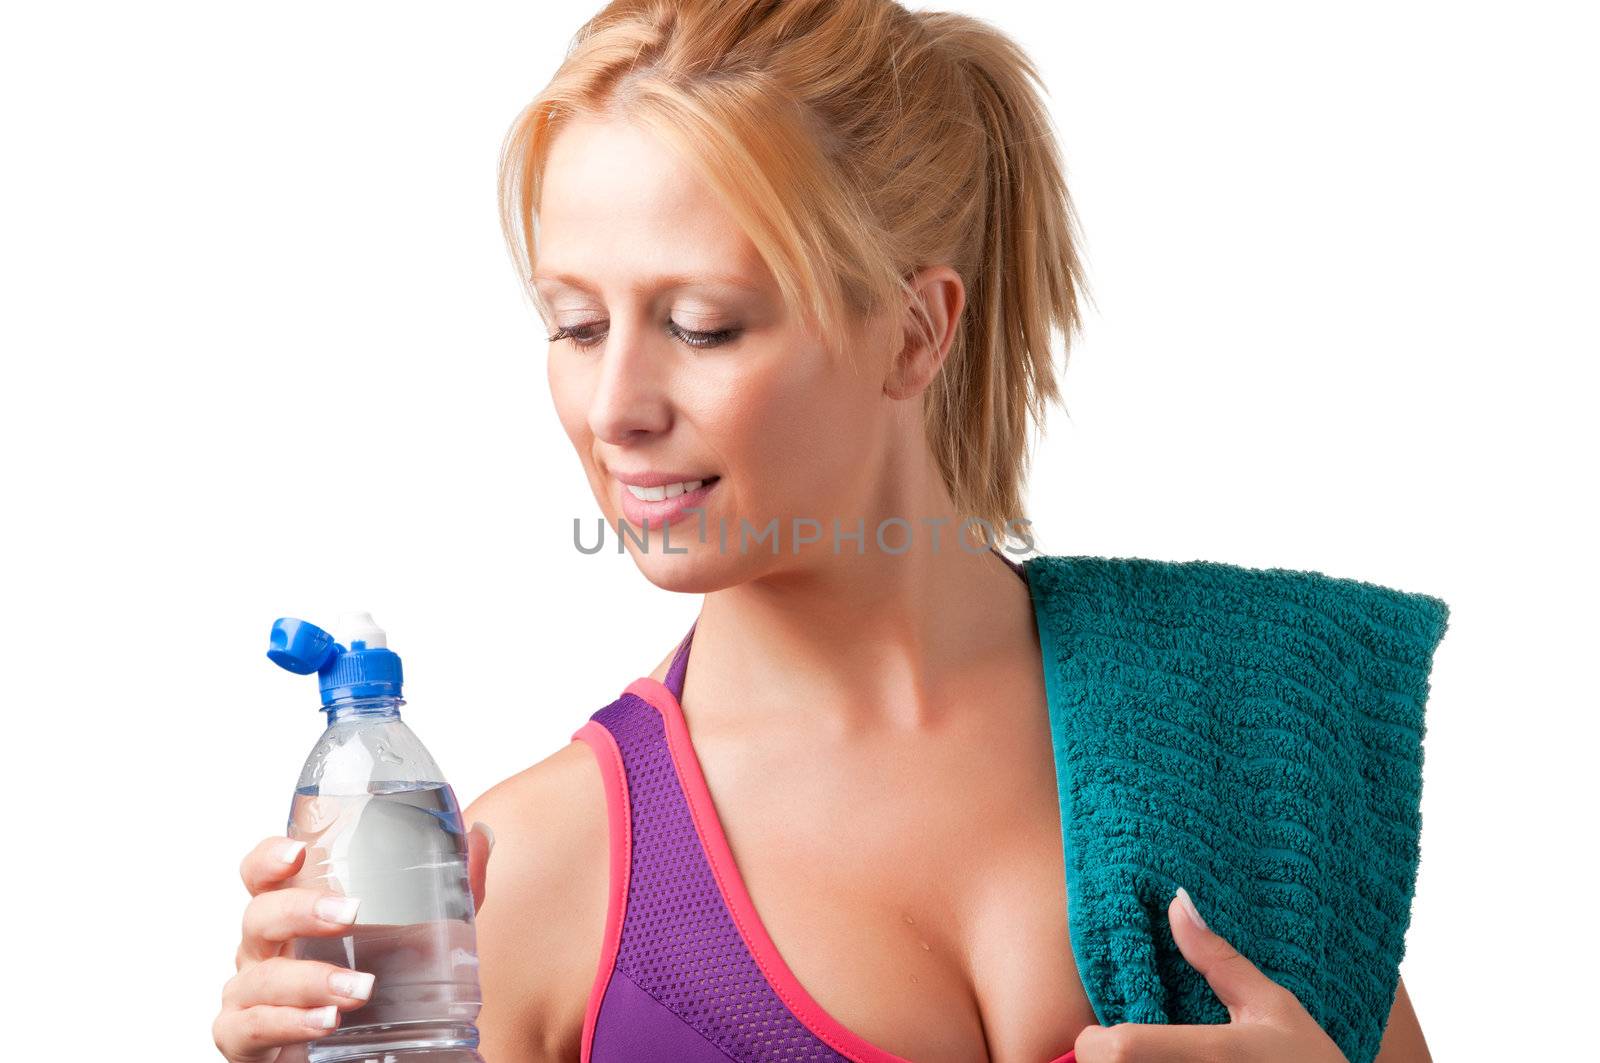 Woman about to drink water from a plastic bottle, isolated in white